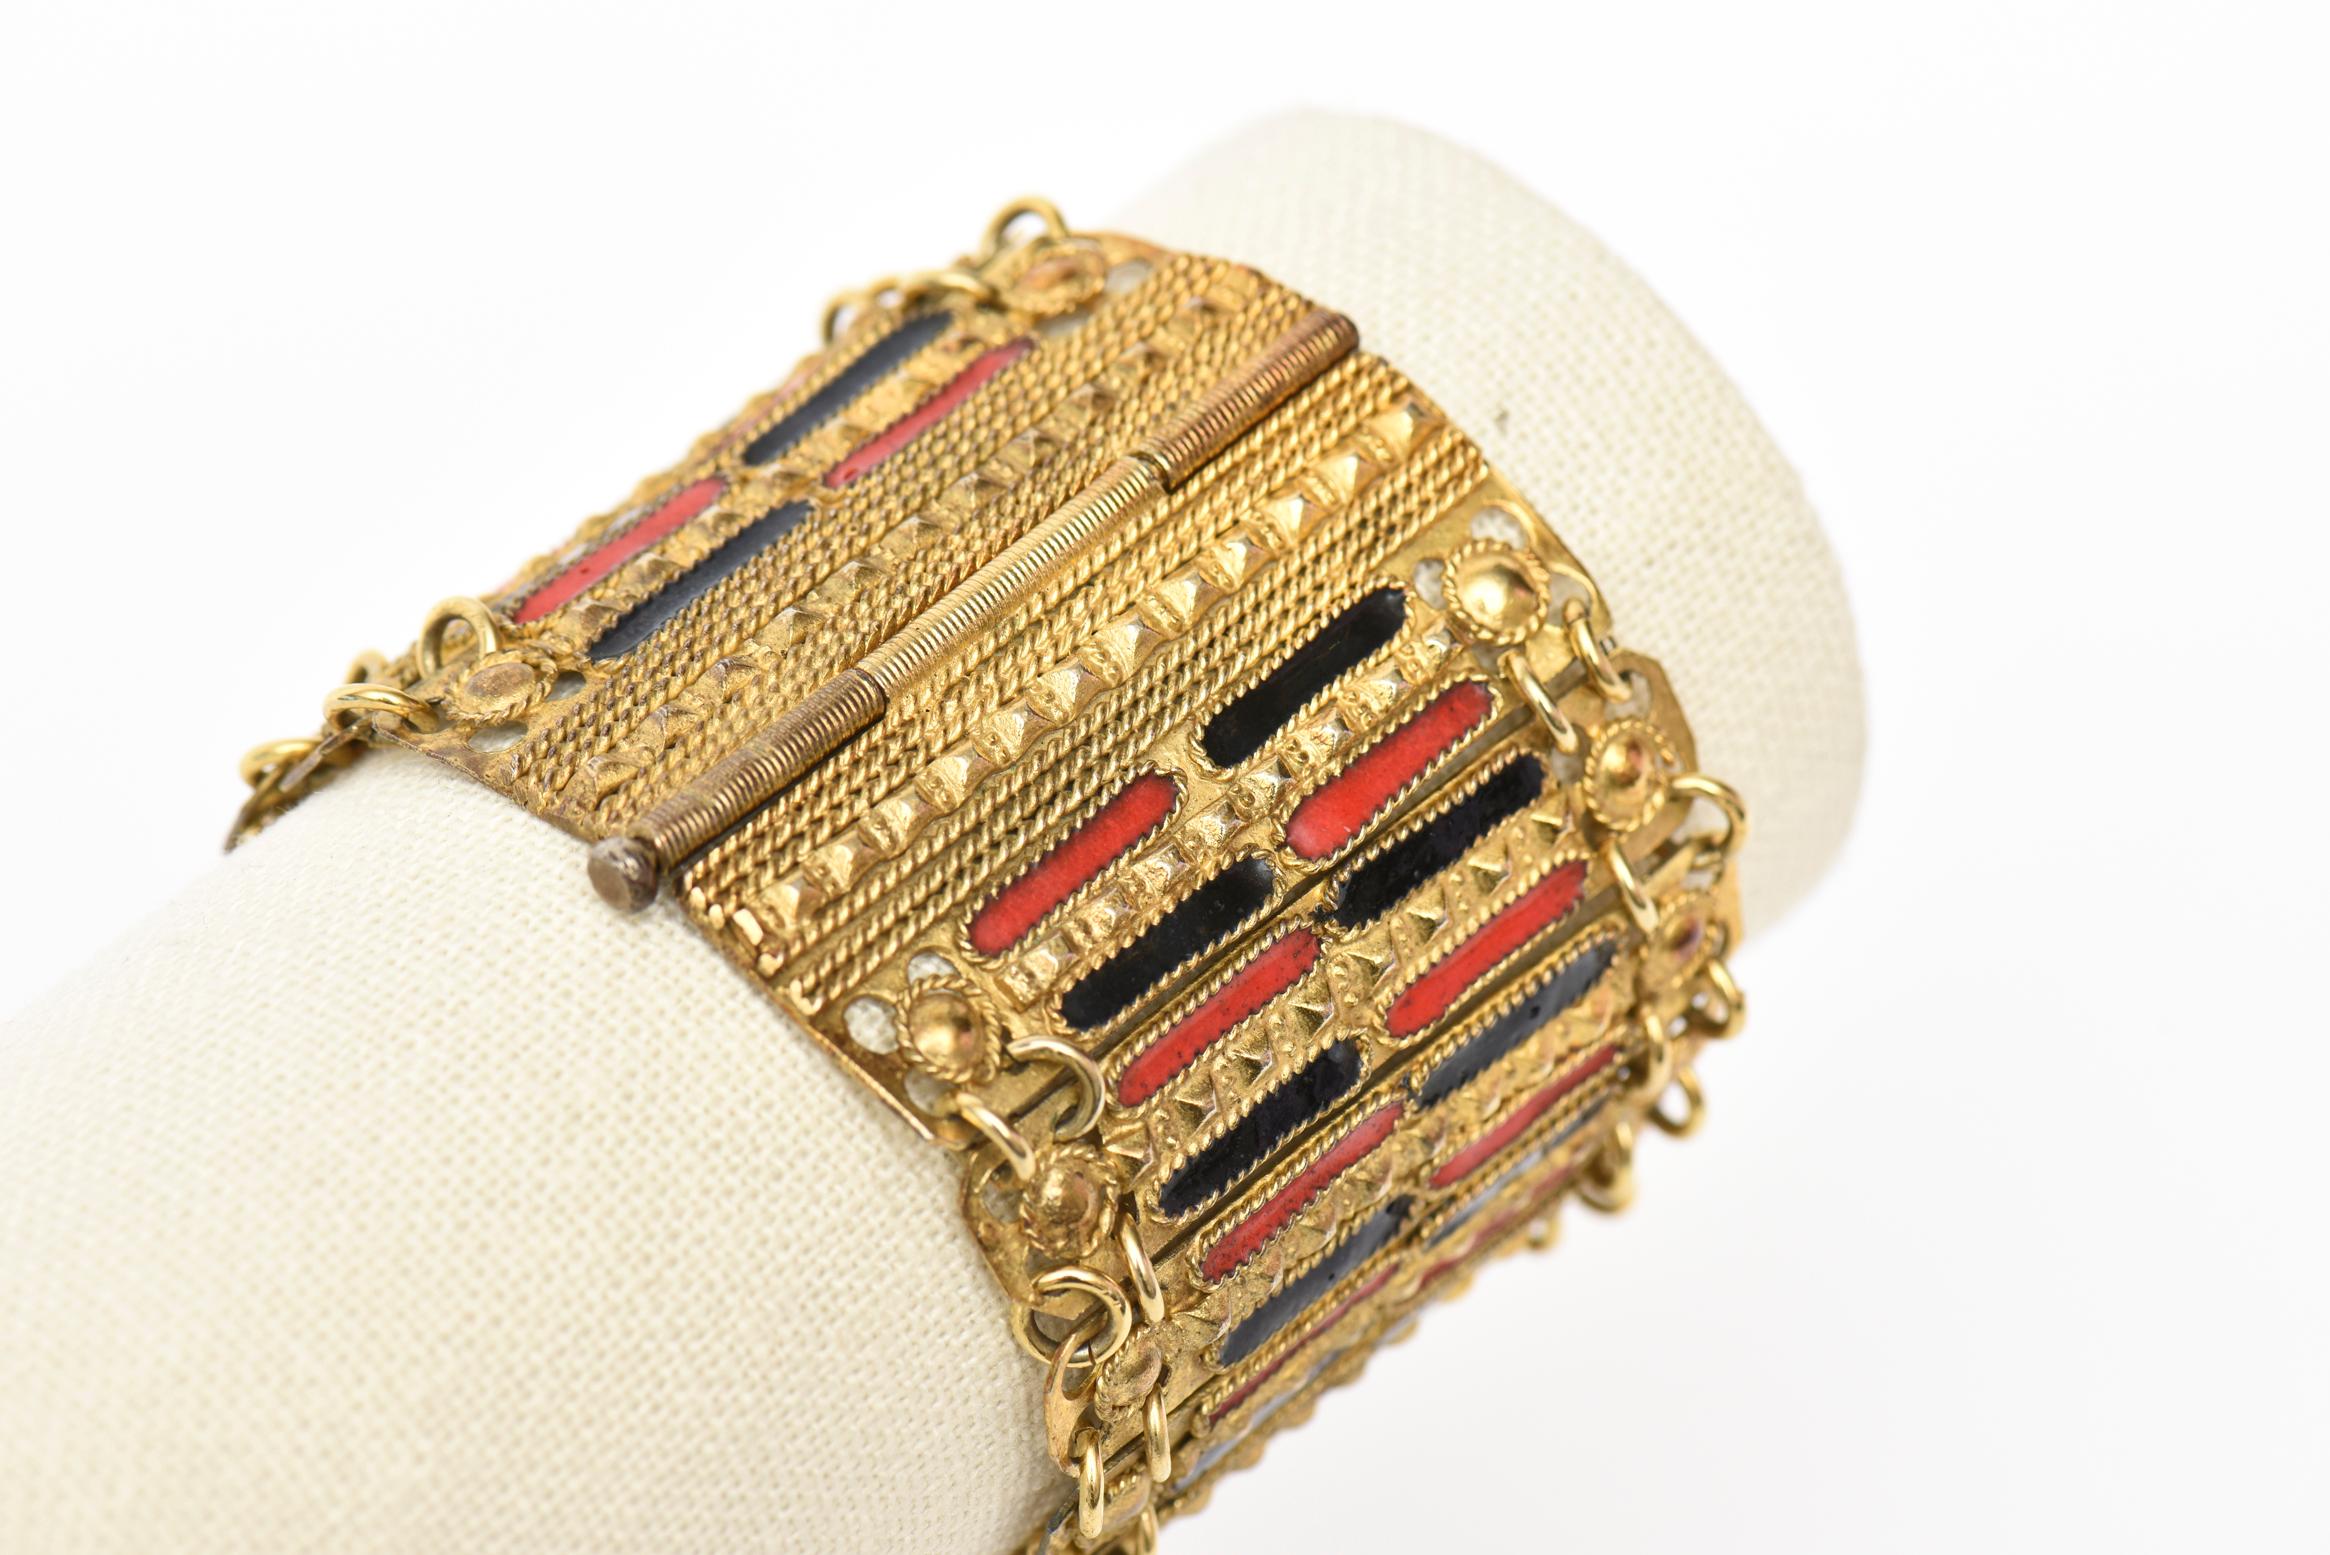  Vintage Grecian Gold Plated Metal With Red And Black Enamel Cuff Bracelet For Sale 4